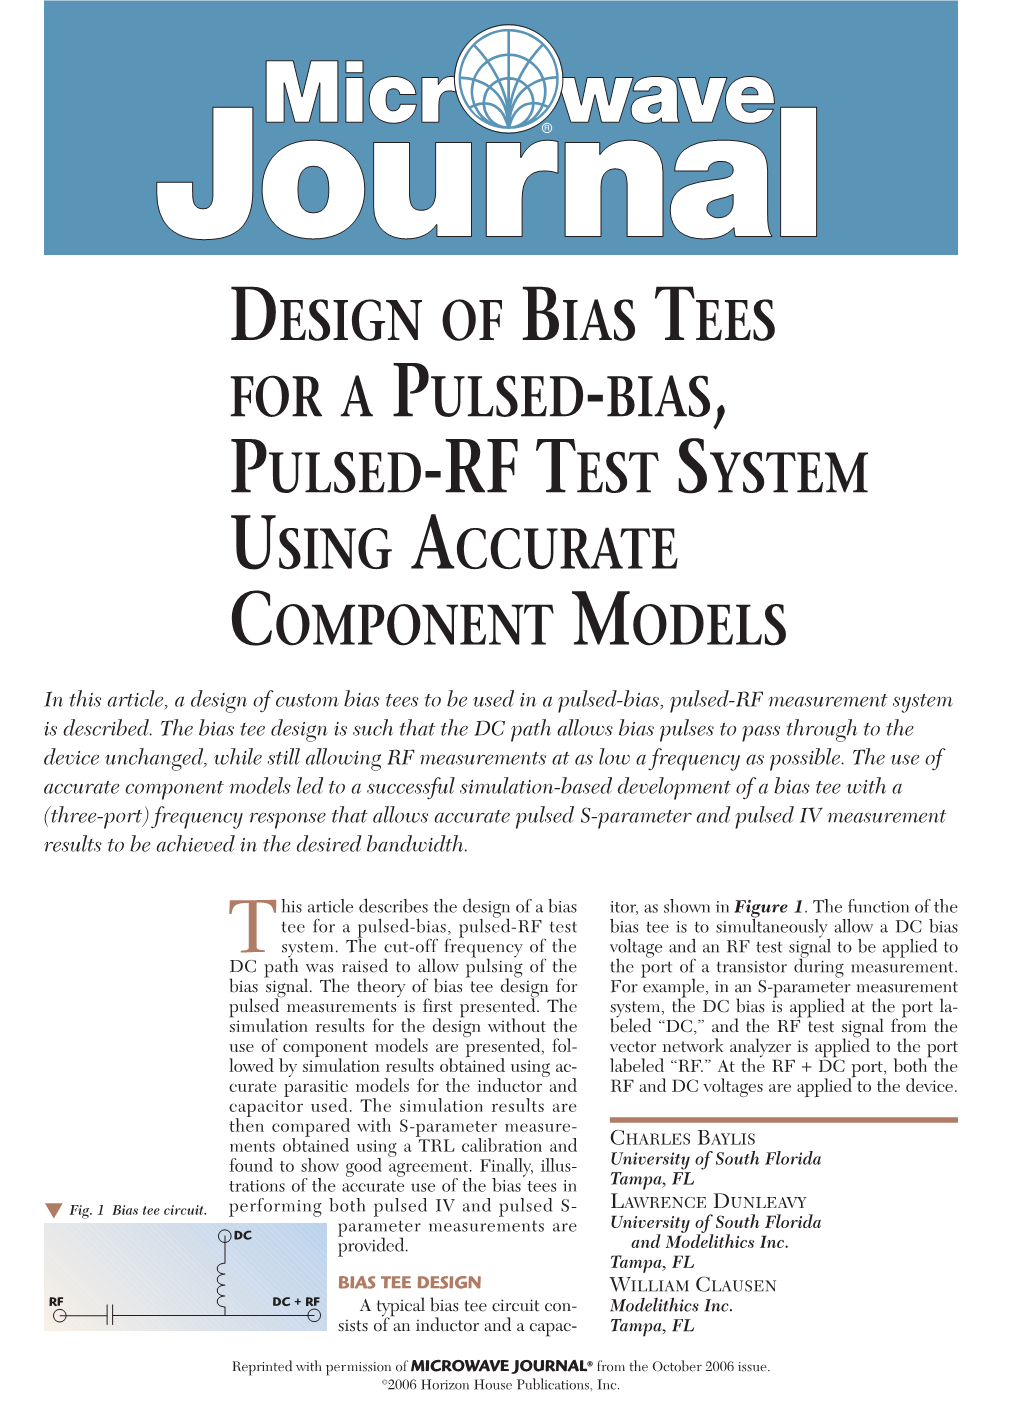 Design of Bias Tees for a Pulsed-Bias, Pulsed-Rf Test System Using Accurate Component Models